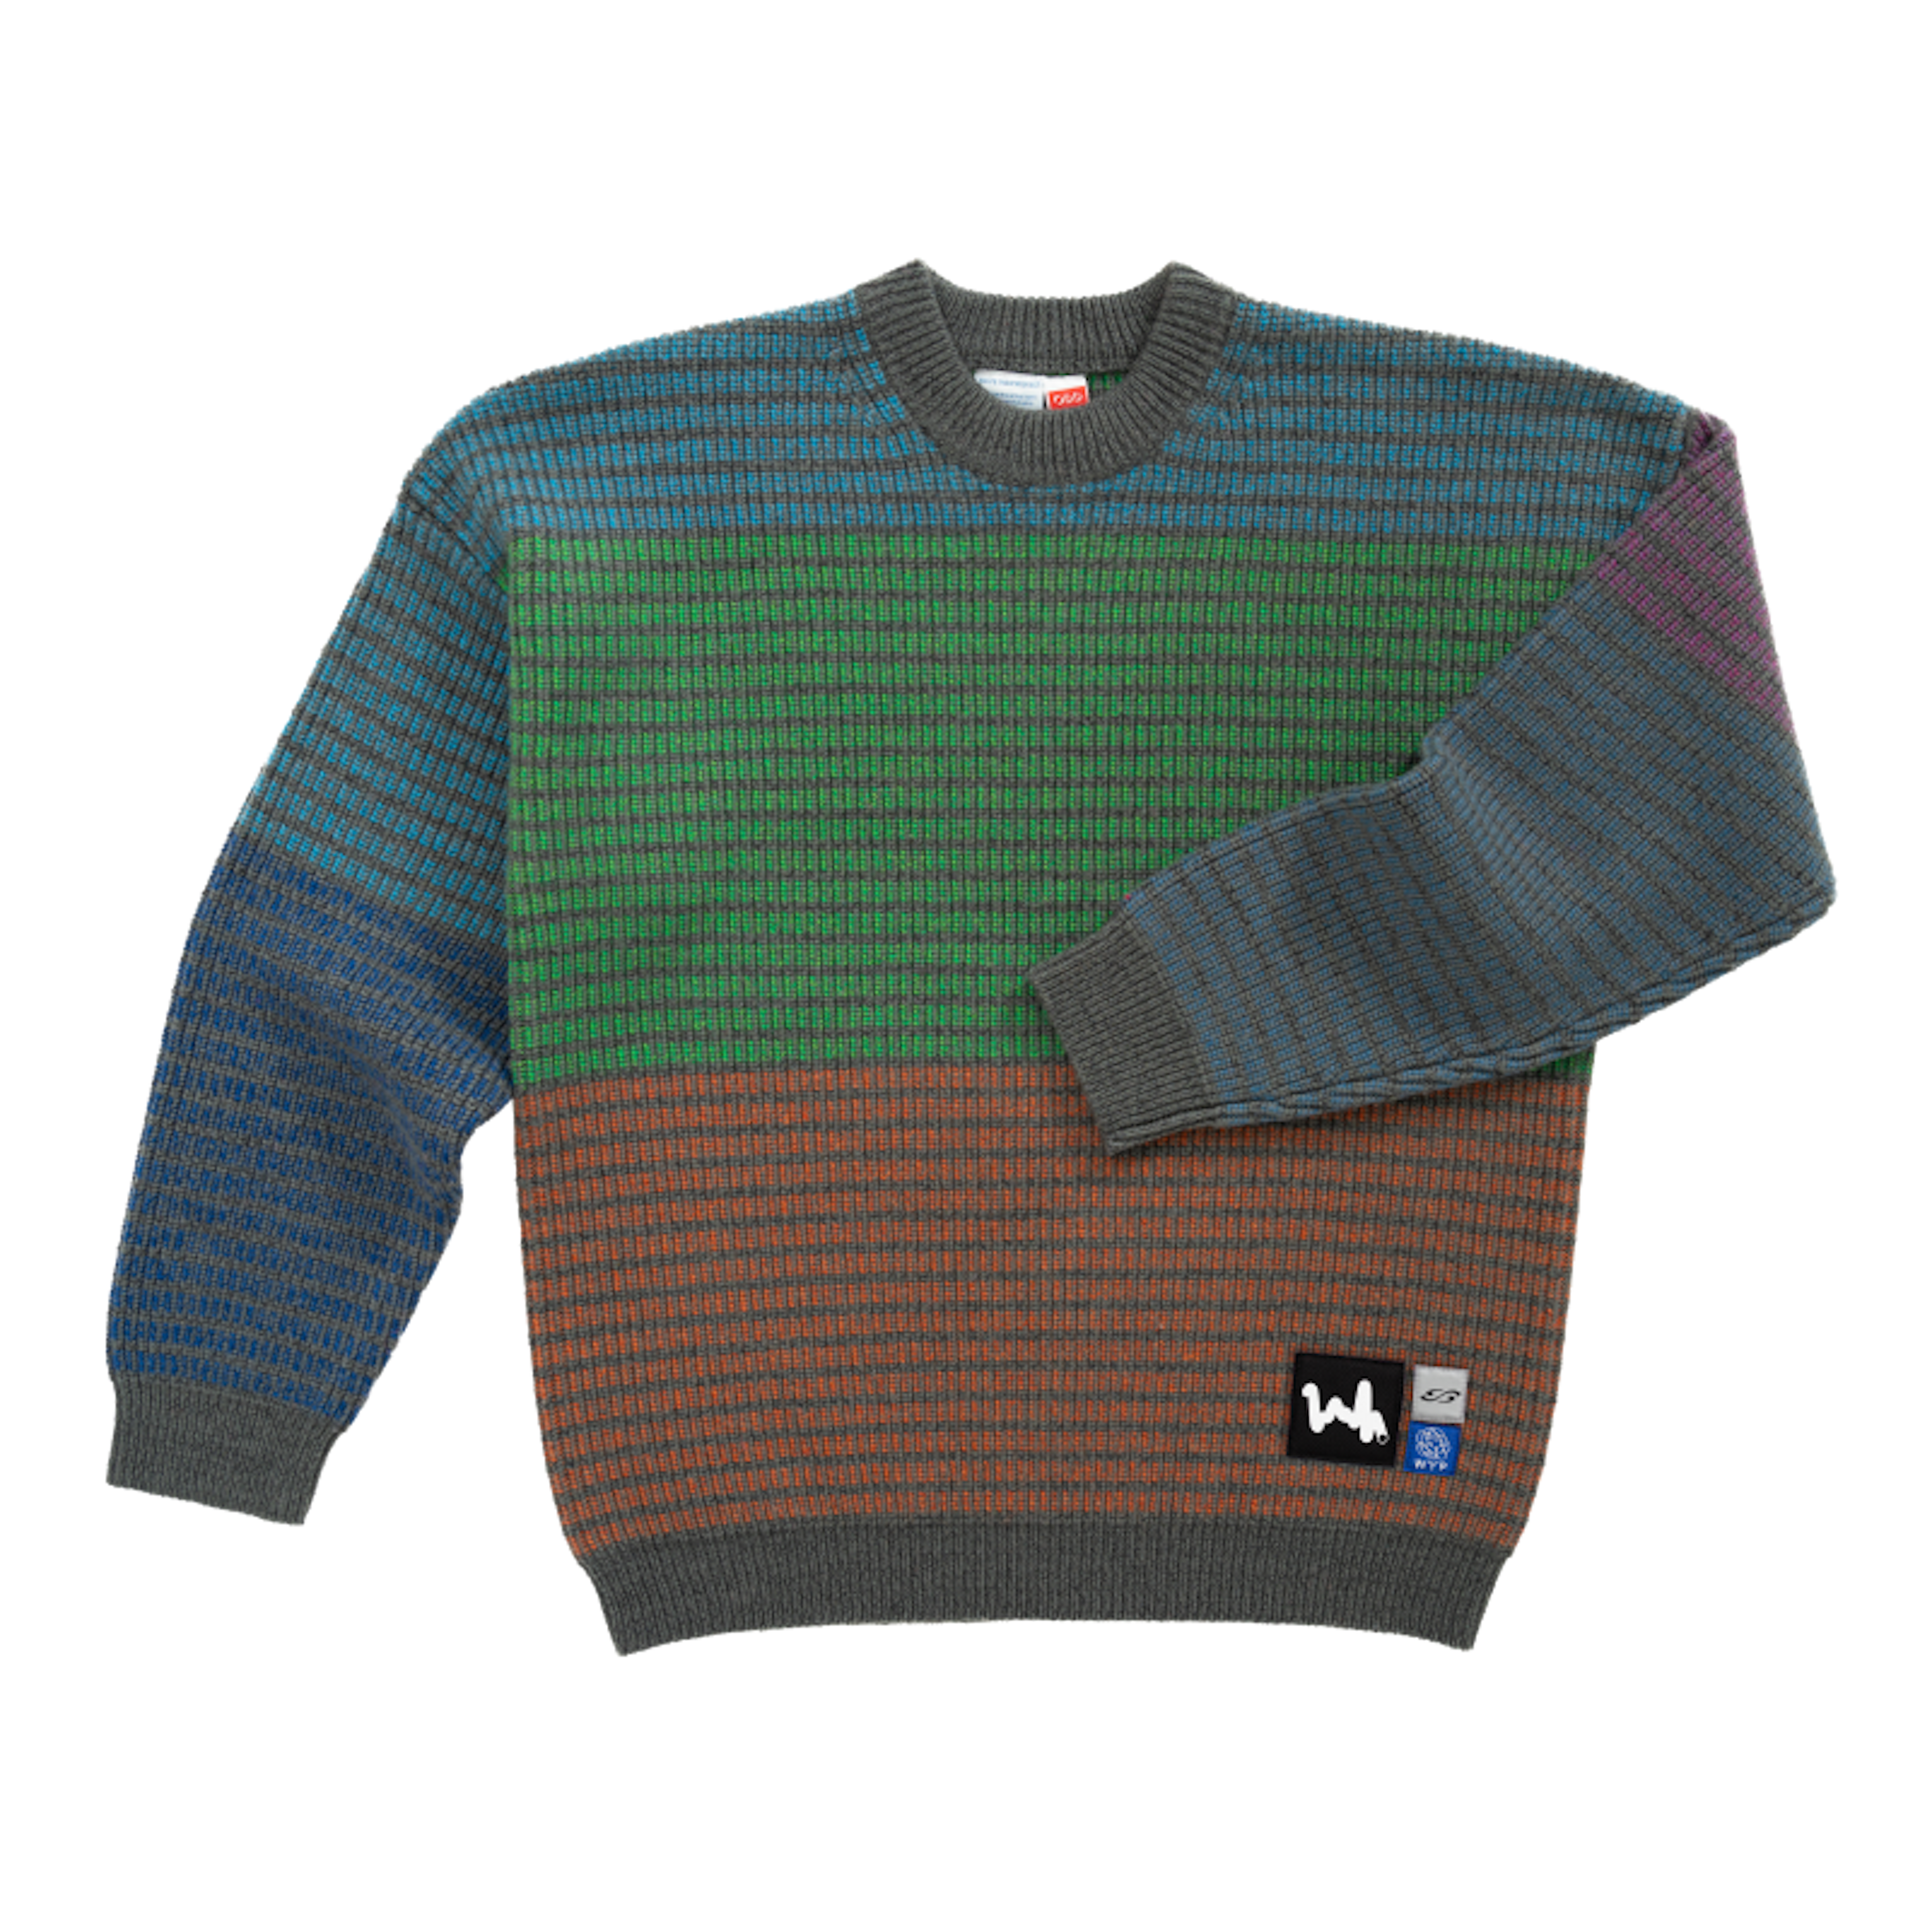 Front of Tribute Brand ODD sweater based on Chromie Squiggle